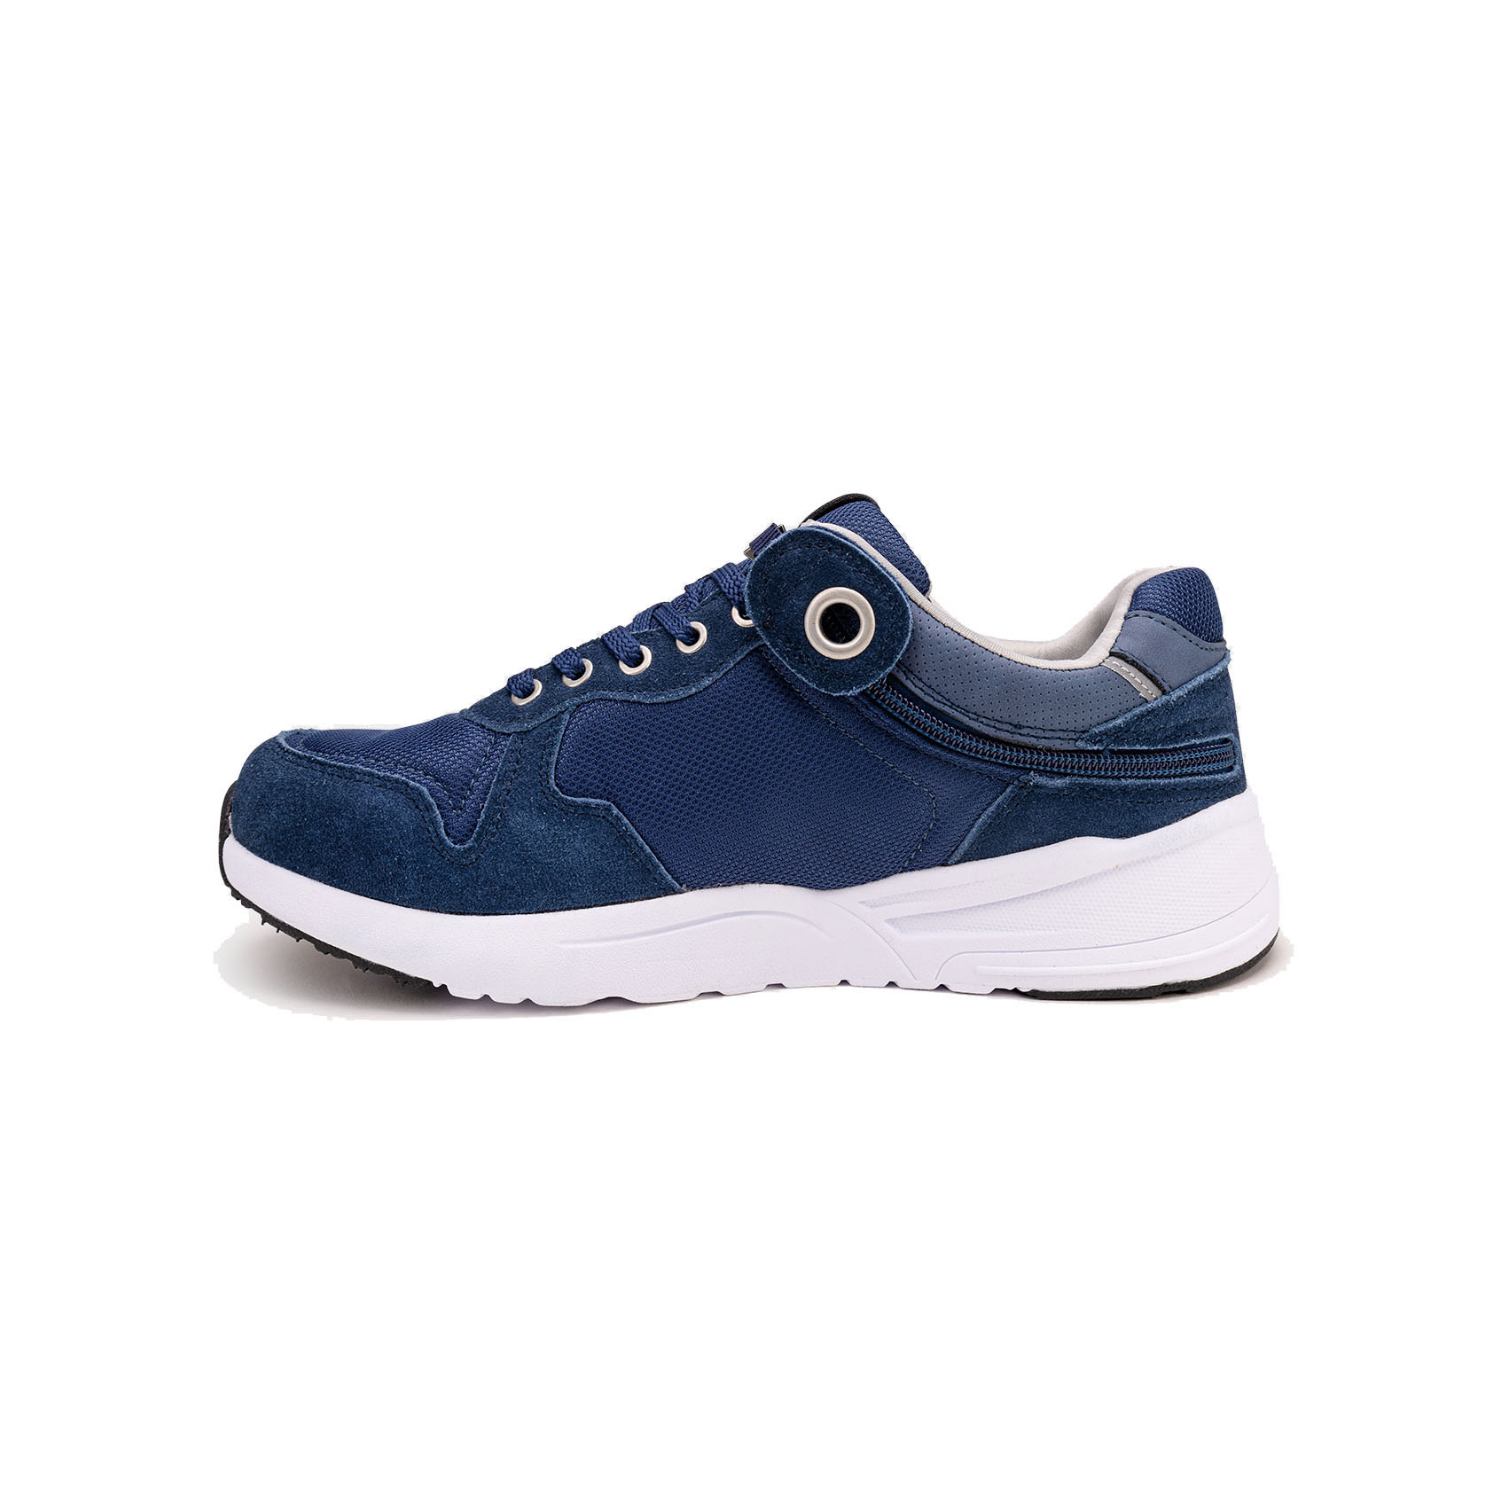 Navy blue mens shoe with white bottom, light blue accents, and rear zipper access.